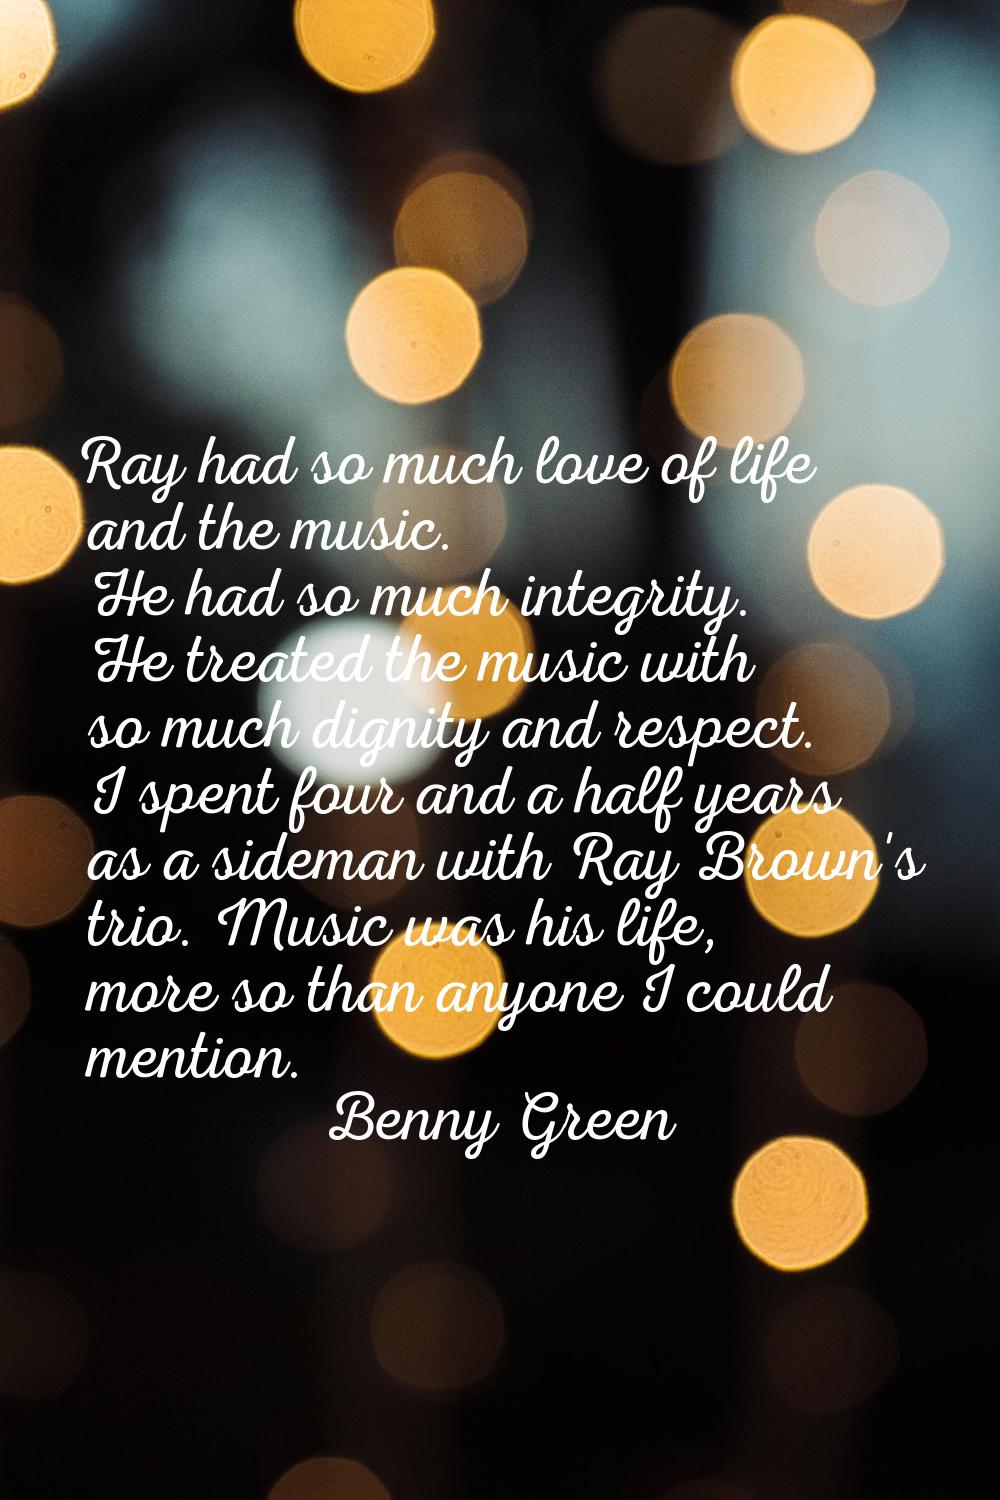 Ray had so much love of life and the music. He had so much integrity. He treated the music with so 